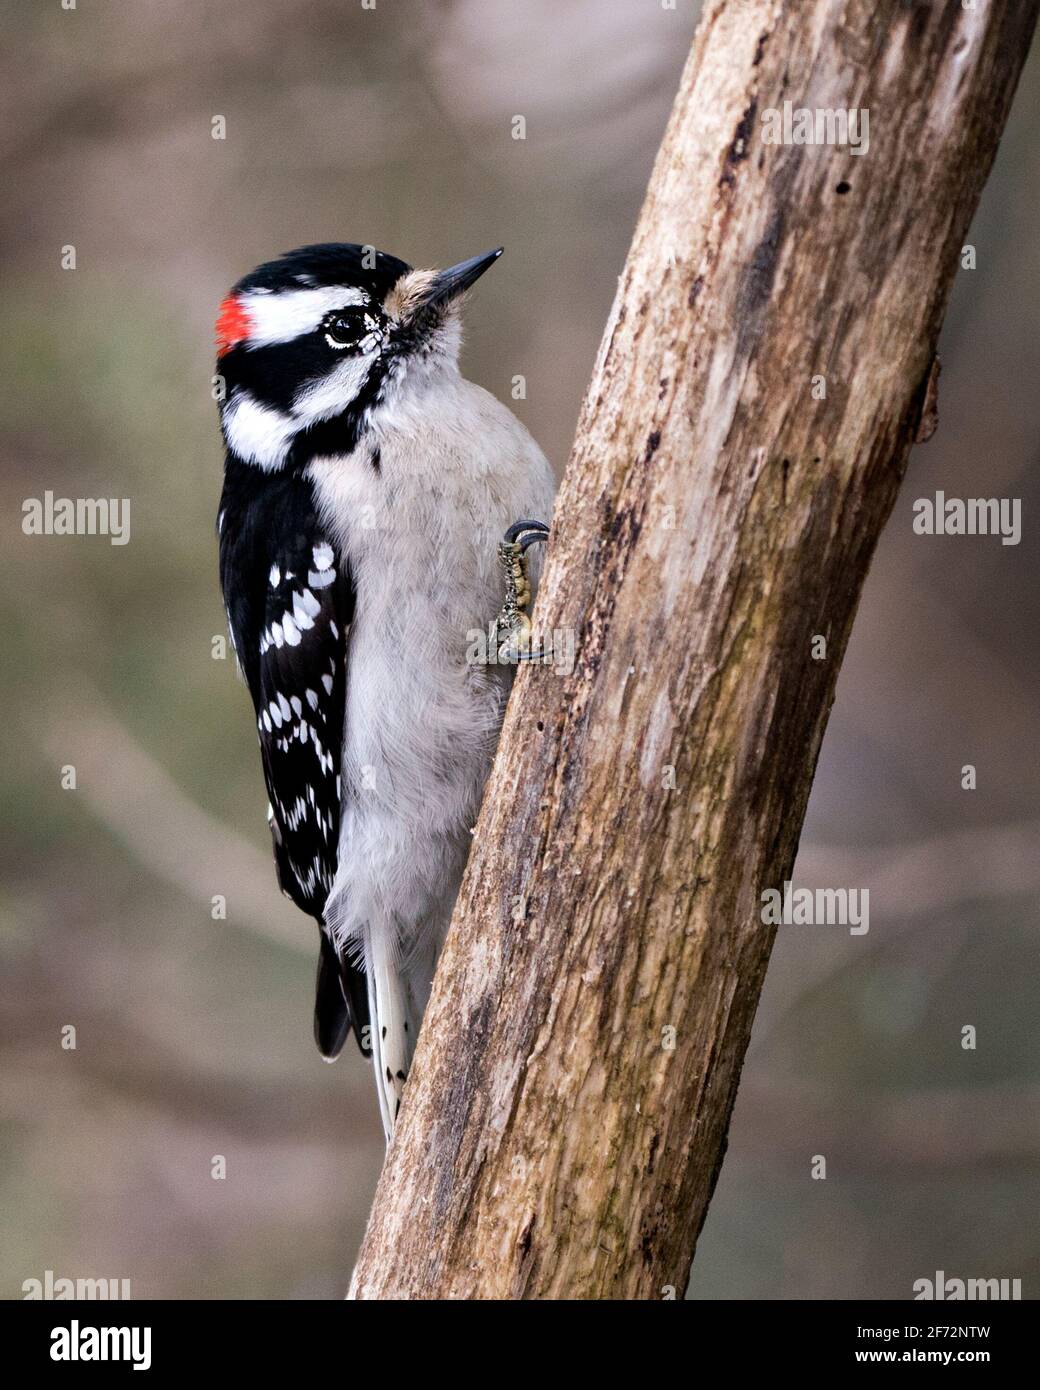 Woodpecker male close-up image climbing tree branch and displaying feather plumage in its environment and habitat in the forest. Image. Picture. Stock Photo